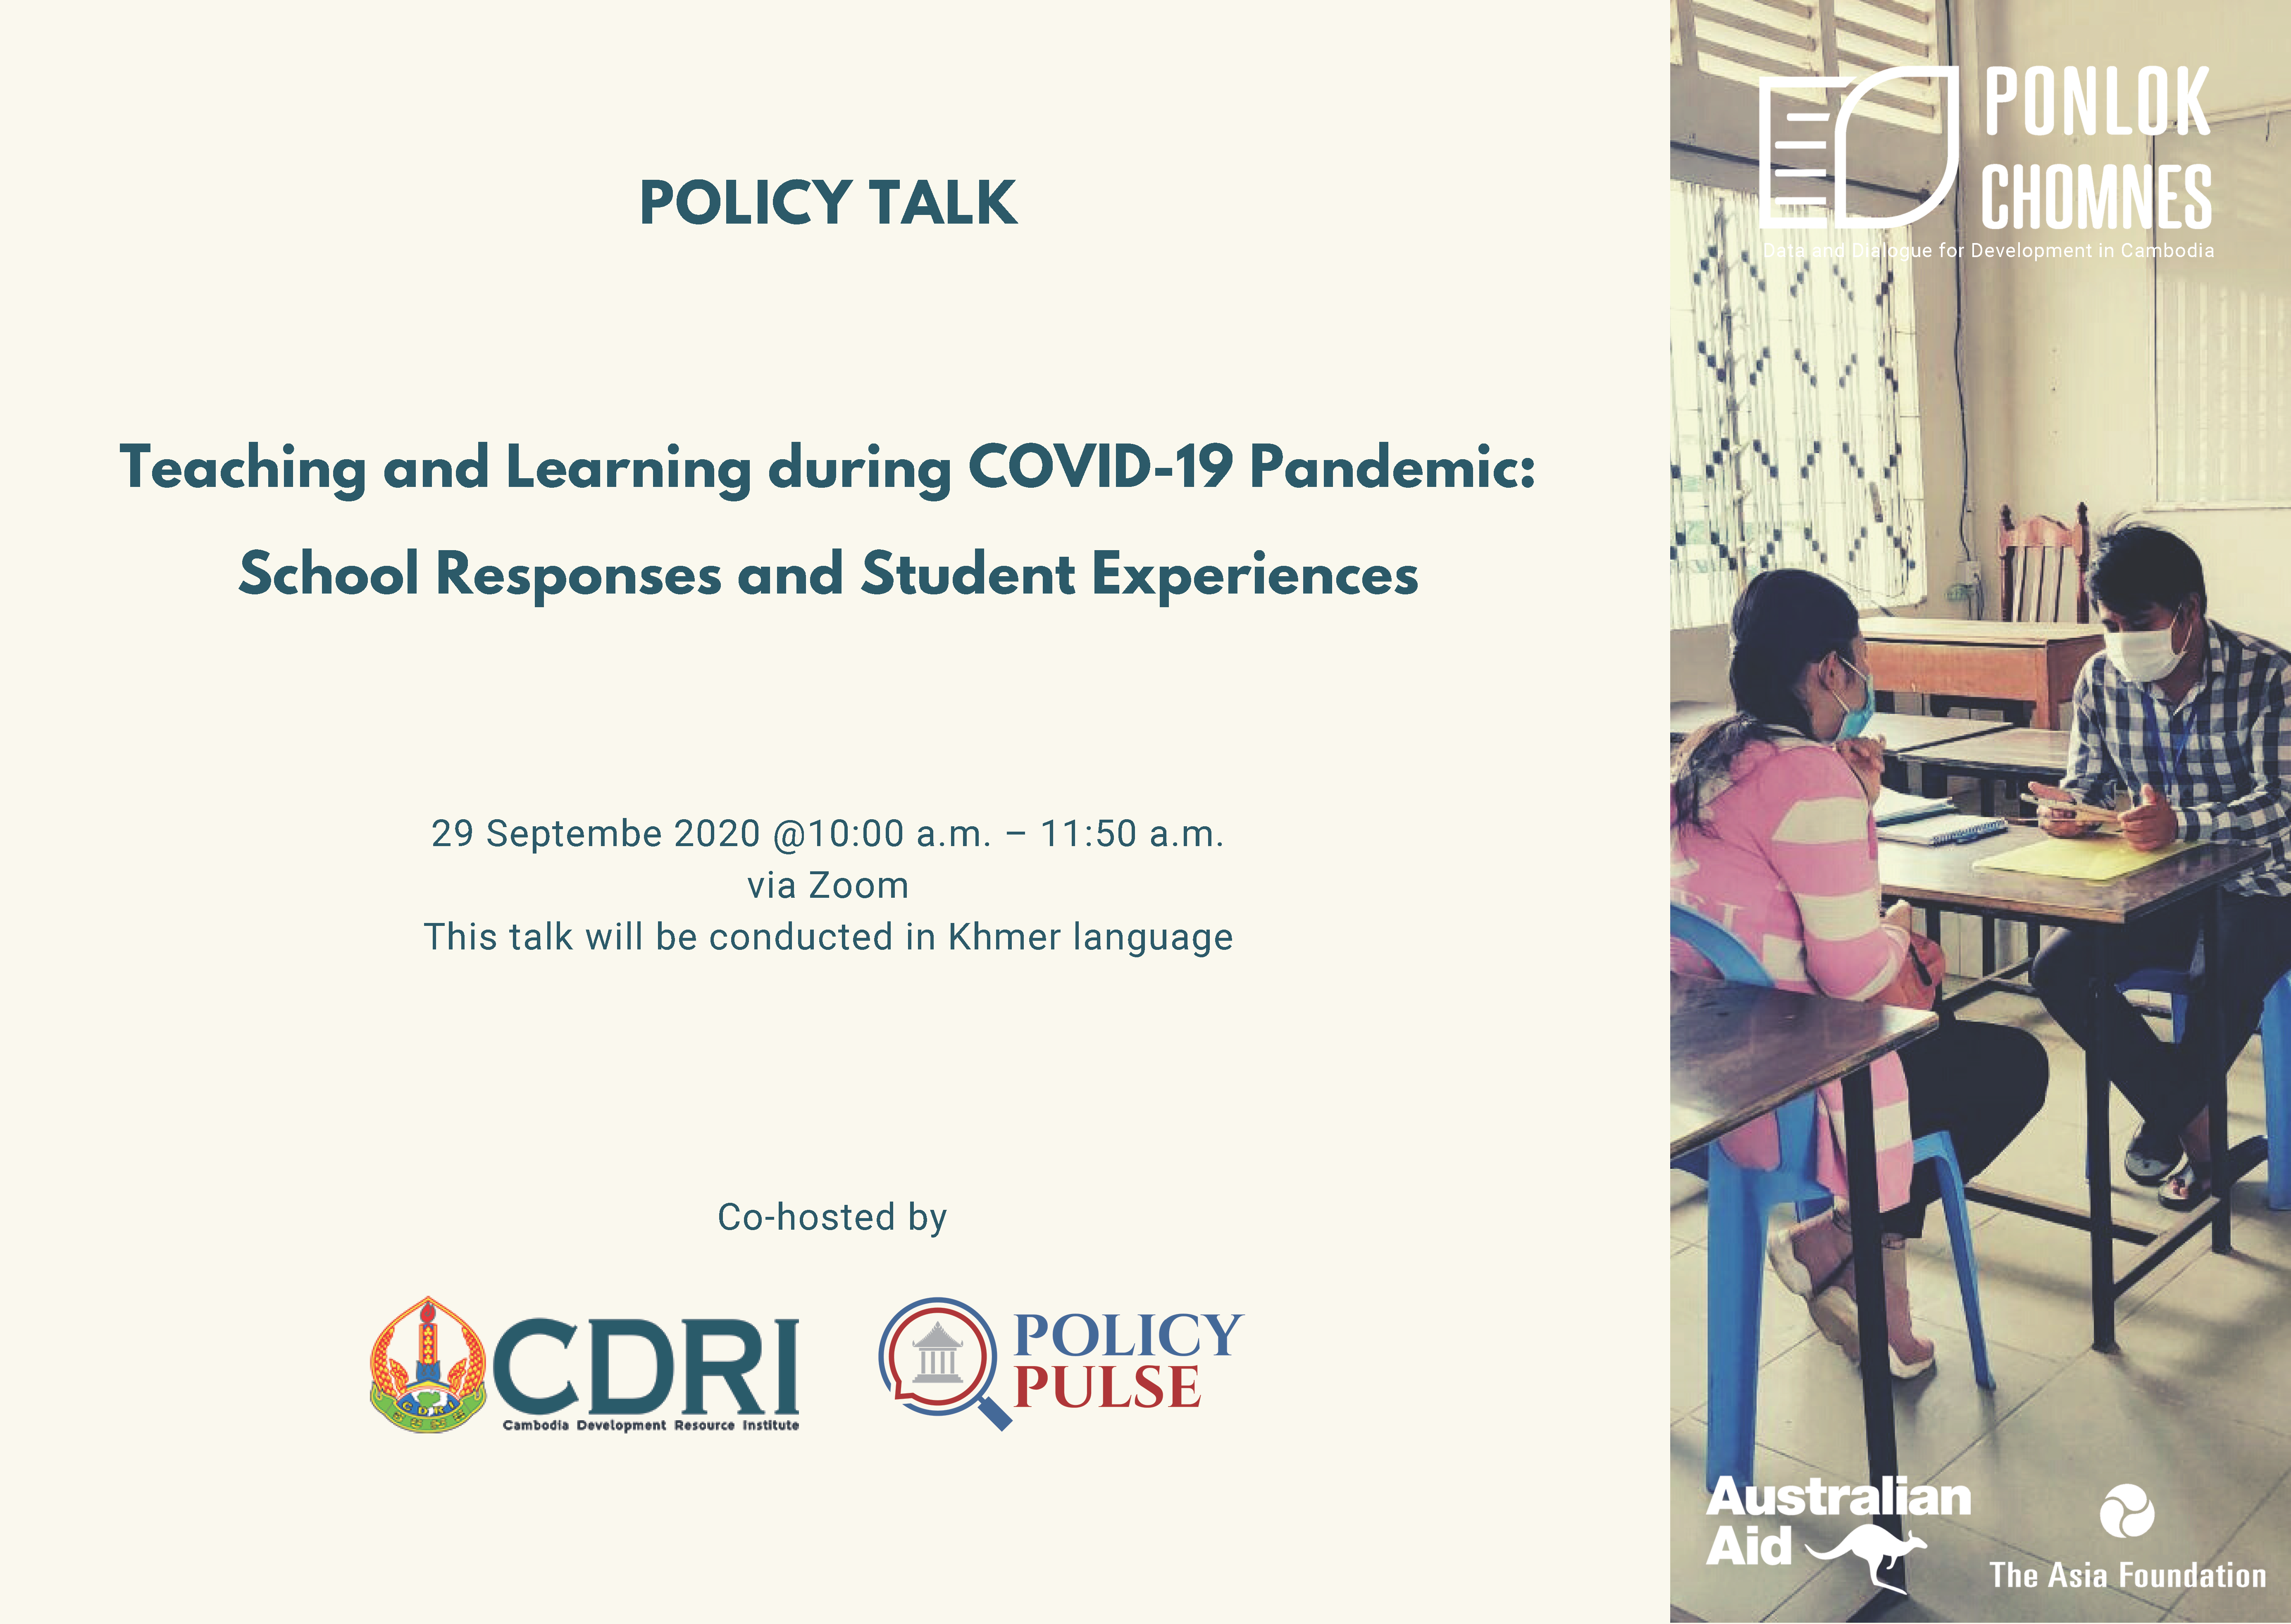 Policy Talk on “Teaching and Learning during COVID-19 Pandemic: School Responses and Student Experiences”